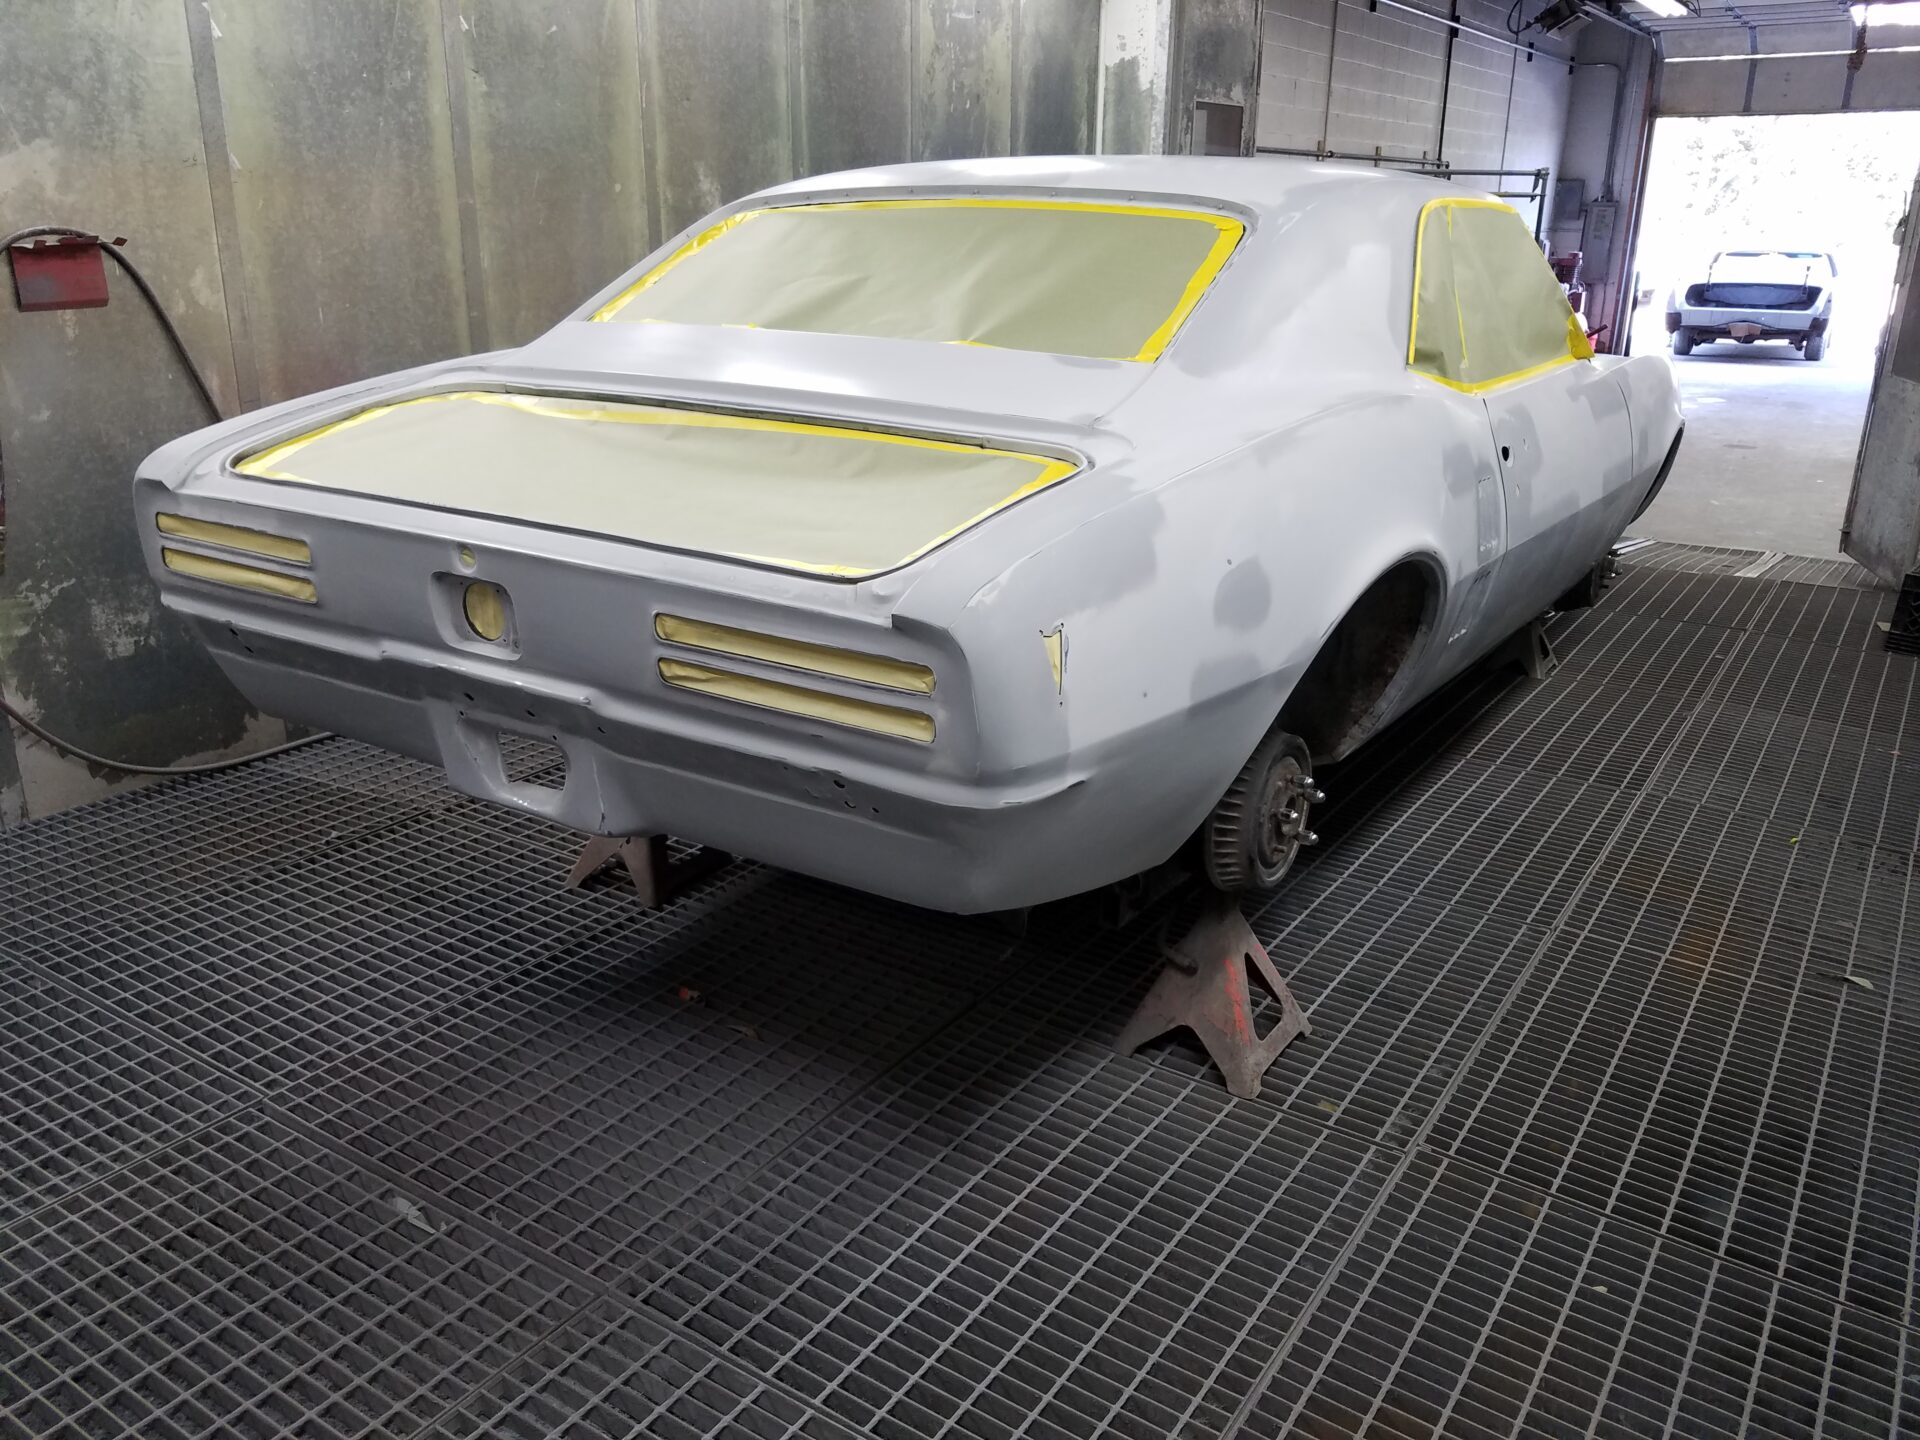 A rear view of the 1968 Pontiac Firebird without wheels